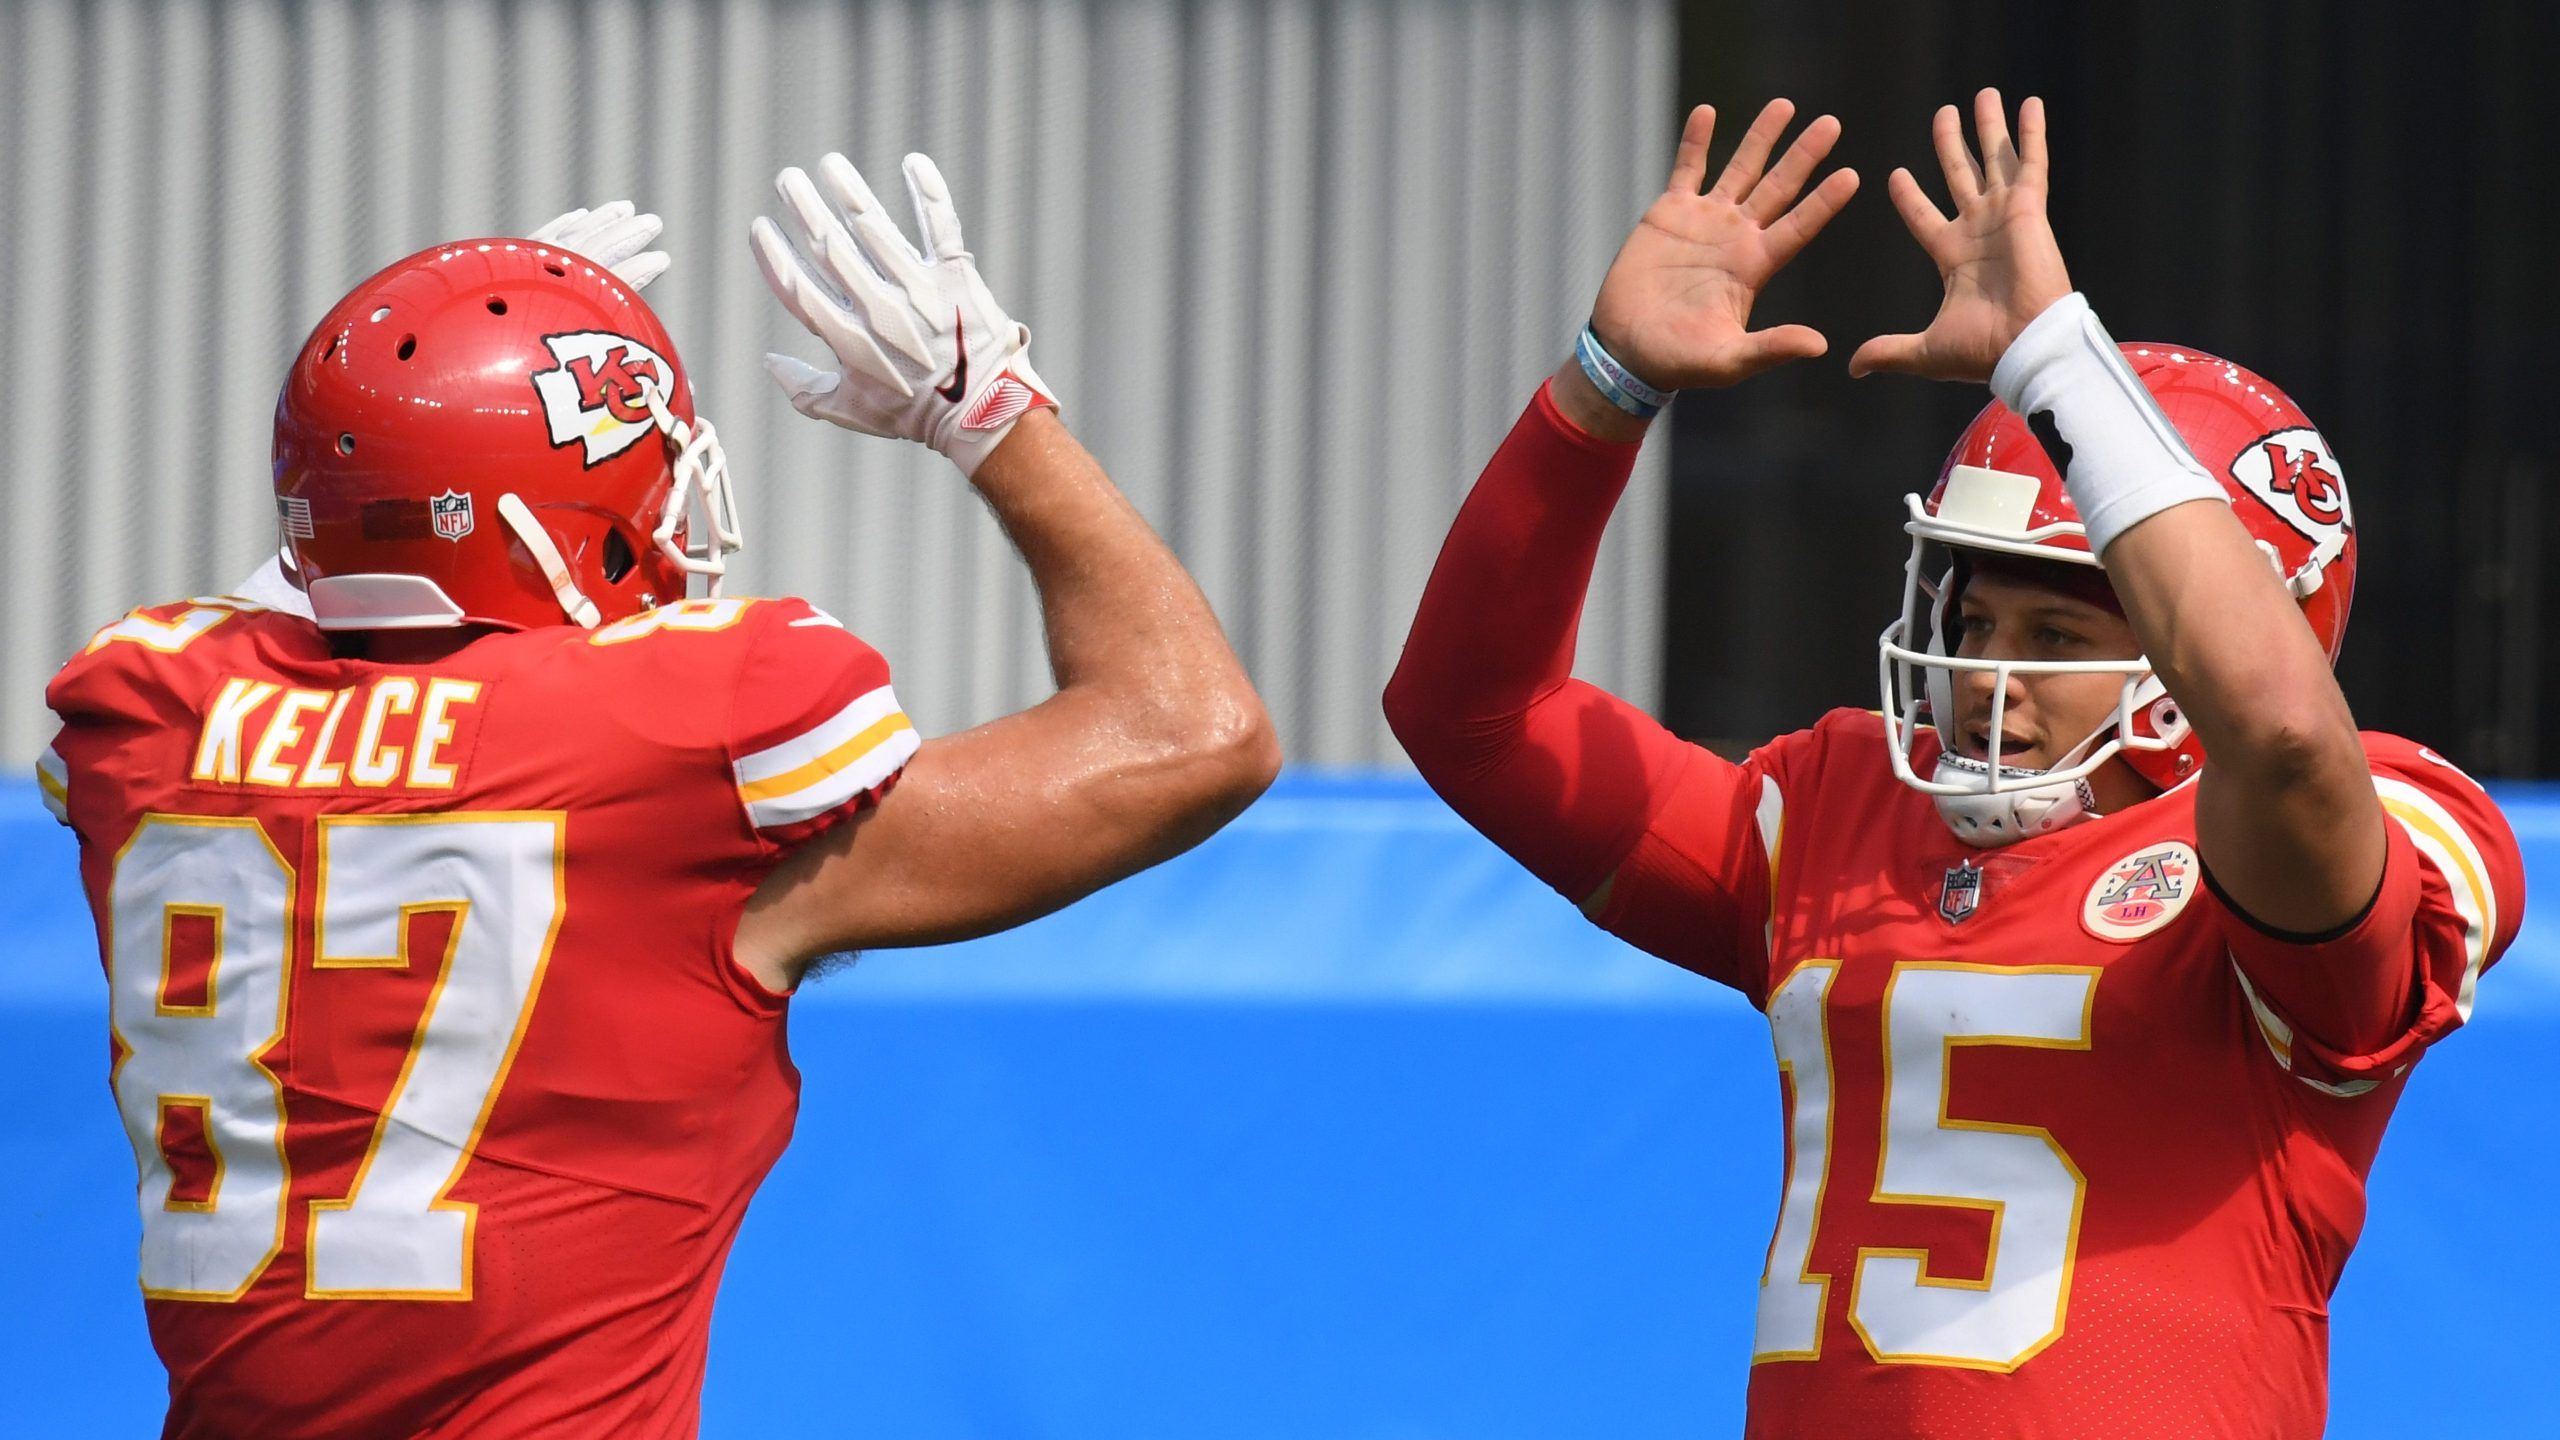 Seven Kansas City Chiefs Players Named To 2021 Pro Bowl Roster. FOX 4 Kansas City WDAF TV. News, Weather, Sports